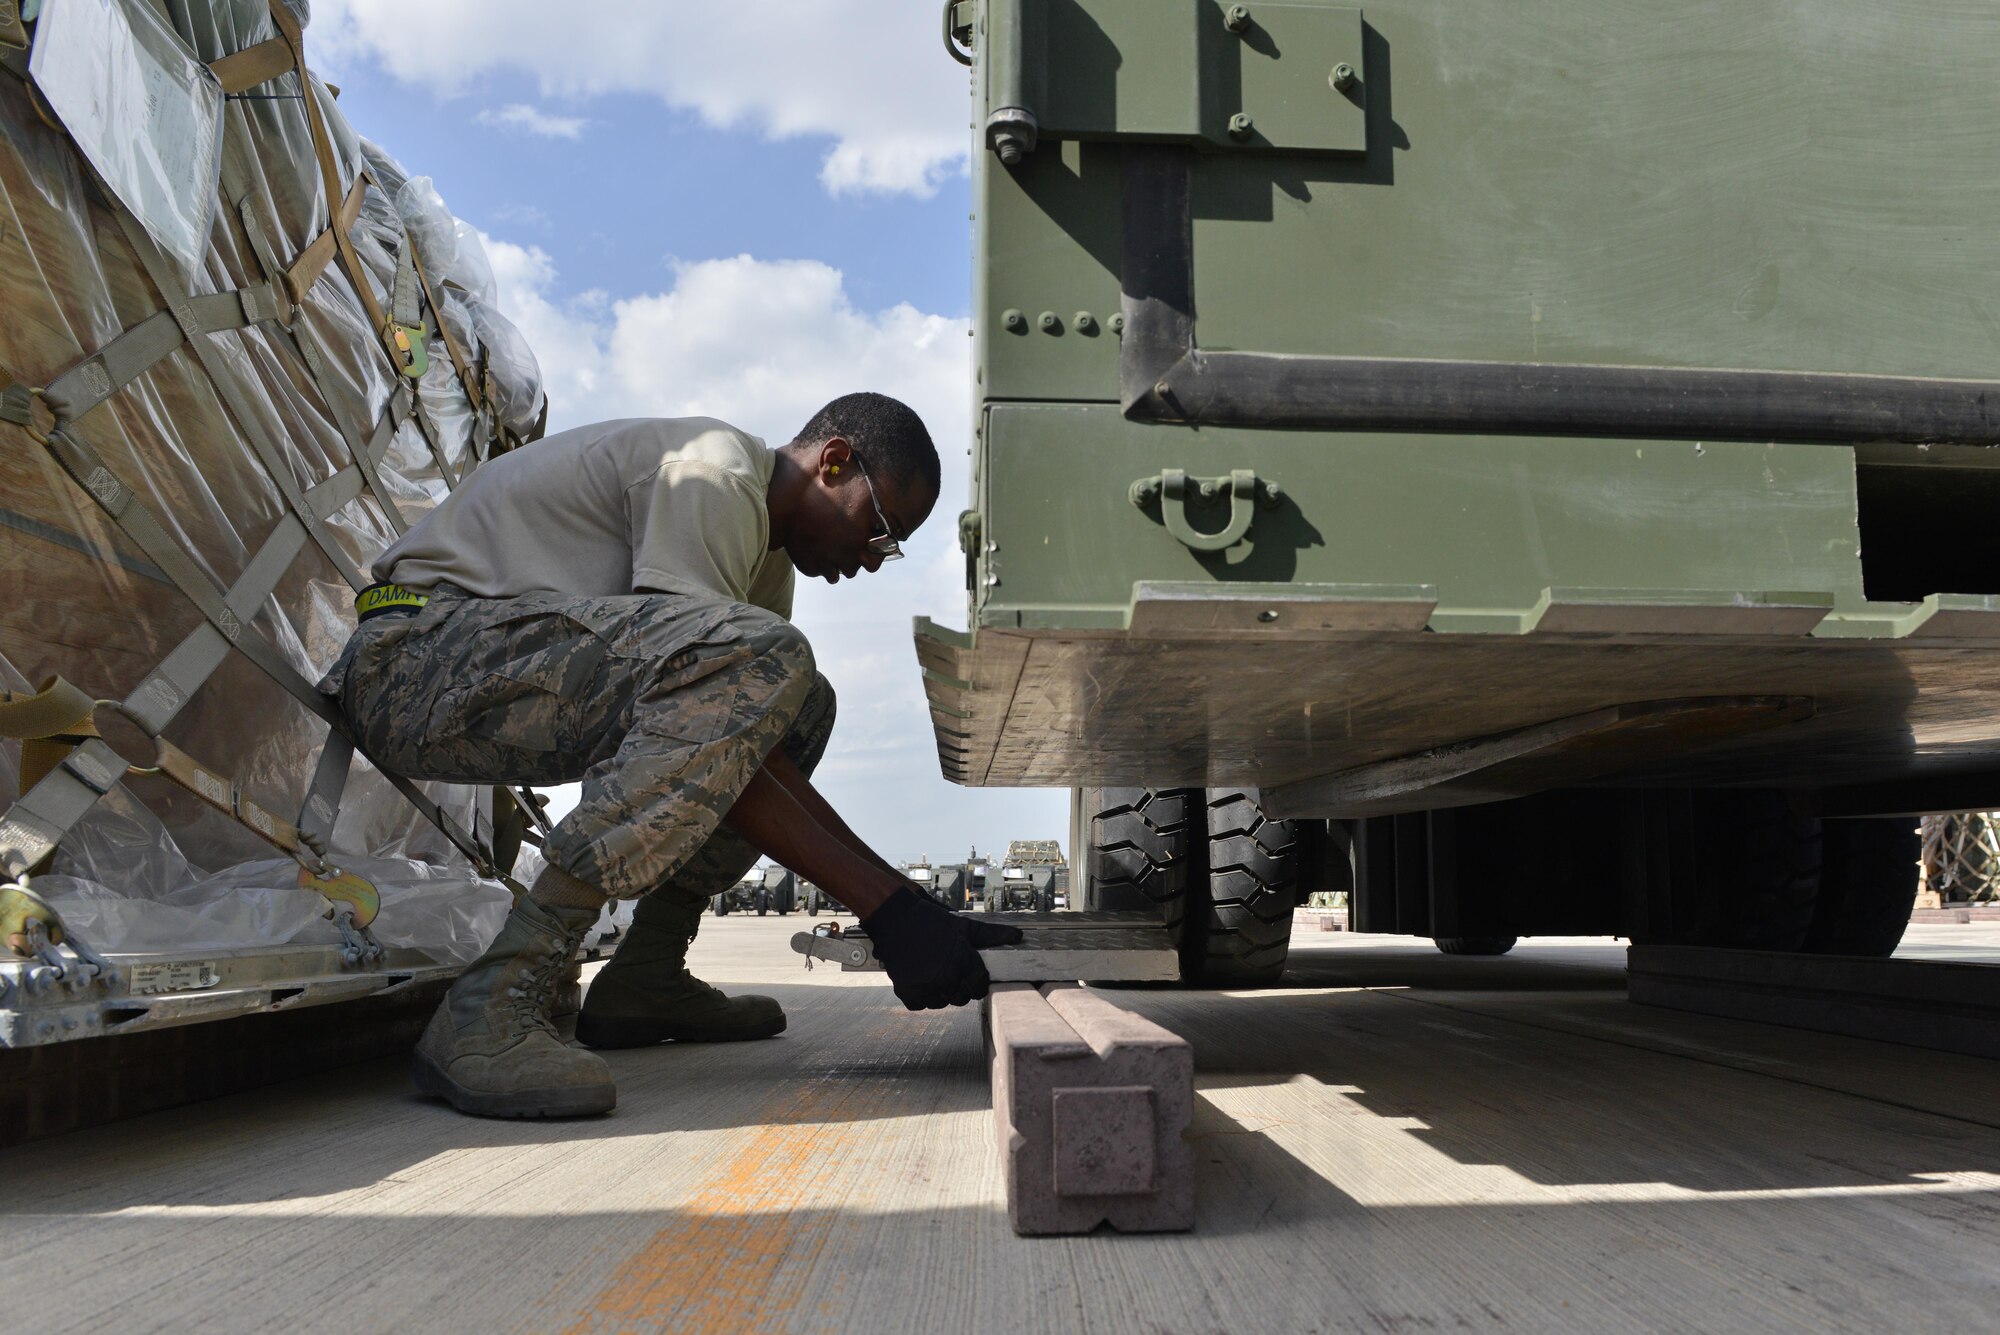 U.S. Air Force Airman 1st Class Josiah Purnell, 728th Air Mobility Squadron air transportation journeyman, places a scale underneath cargo Oct. 18, 2016, at Incirlik Air Base, Turkey. While inspecting cargo, air transportation specialists validate cargo weight and document accordingly. (U.S. Air Force photo by Senior Airman John Nieves Camacho)